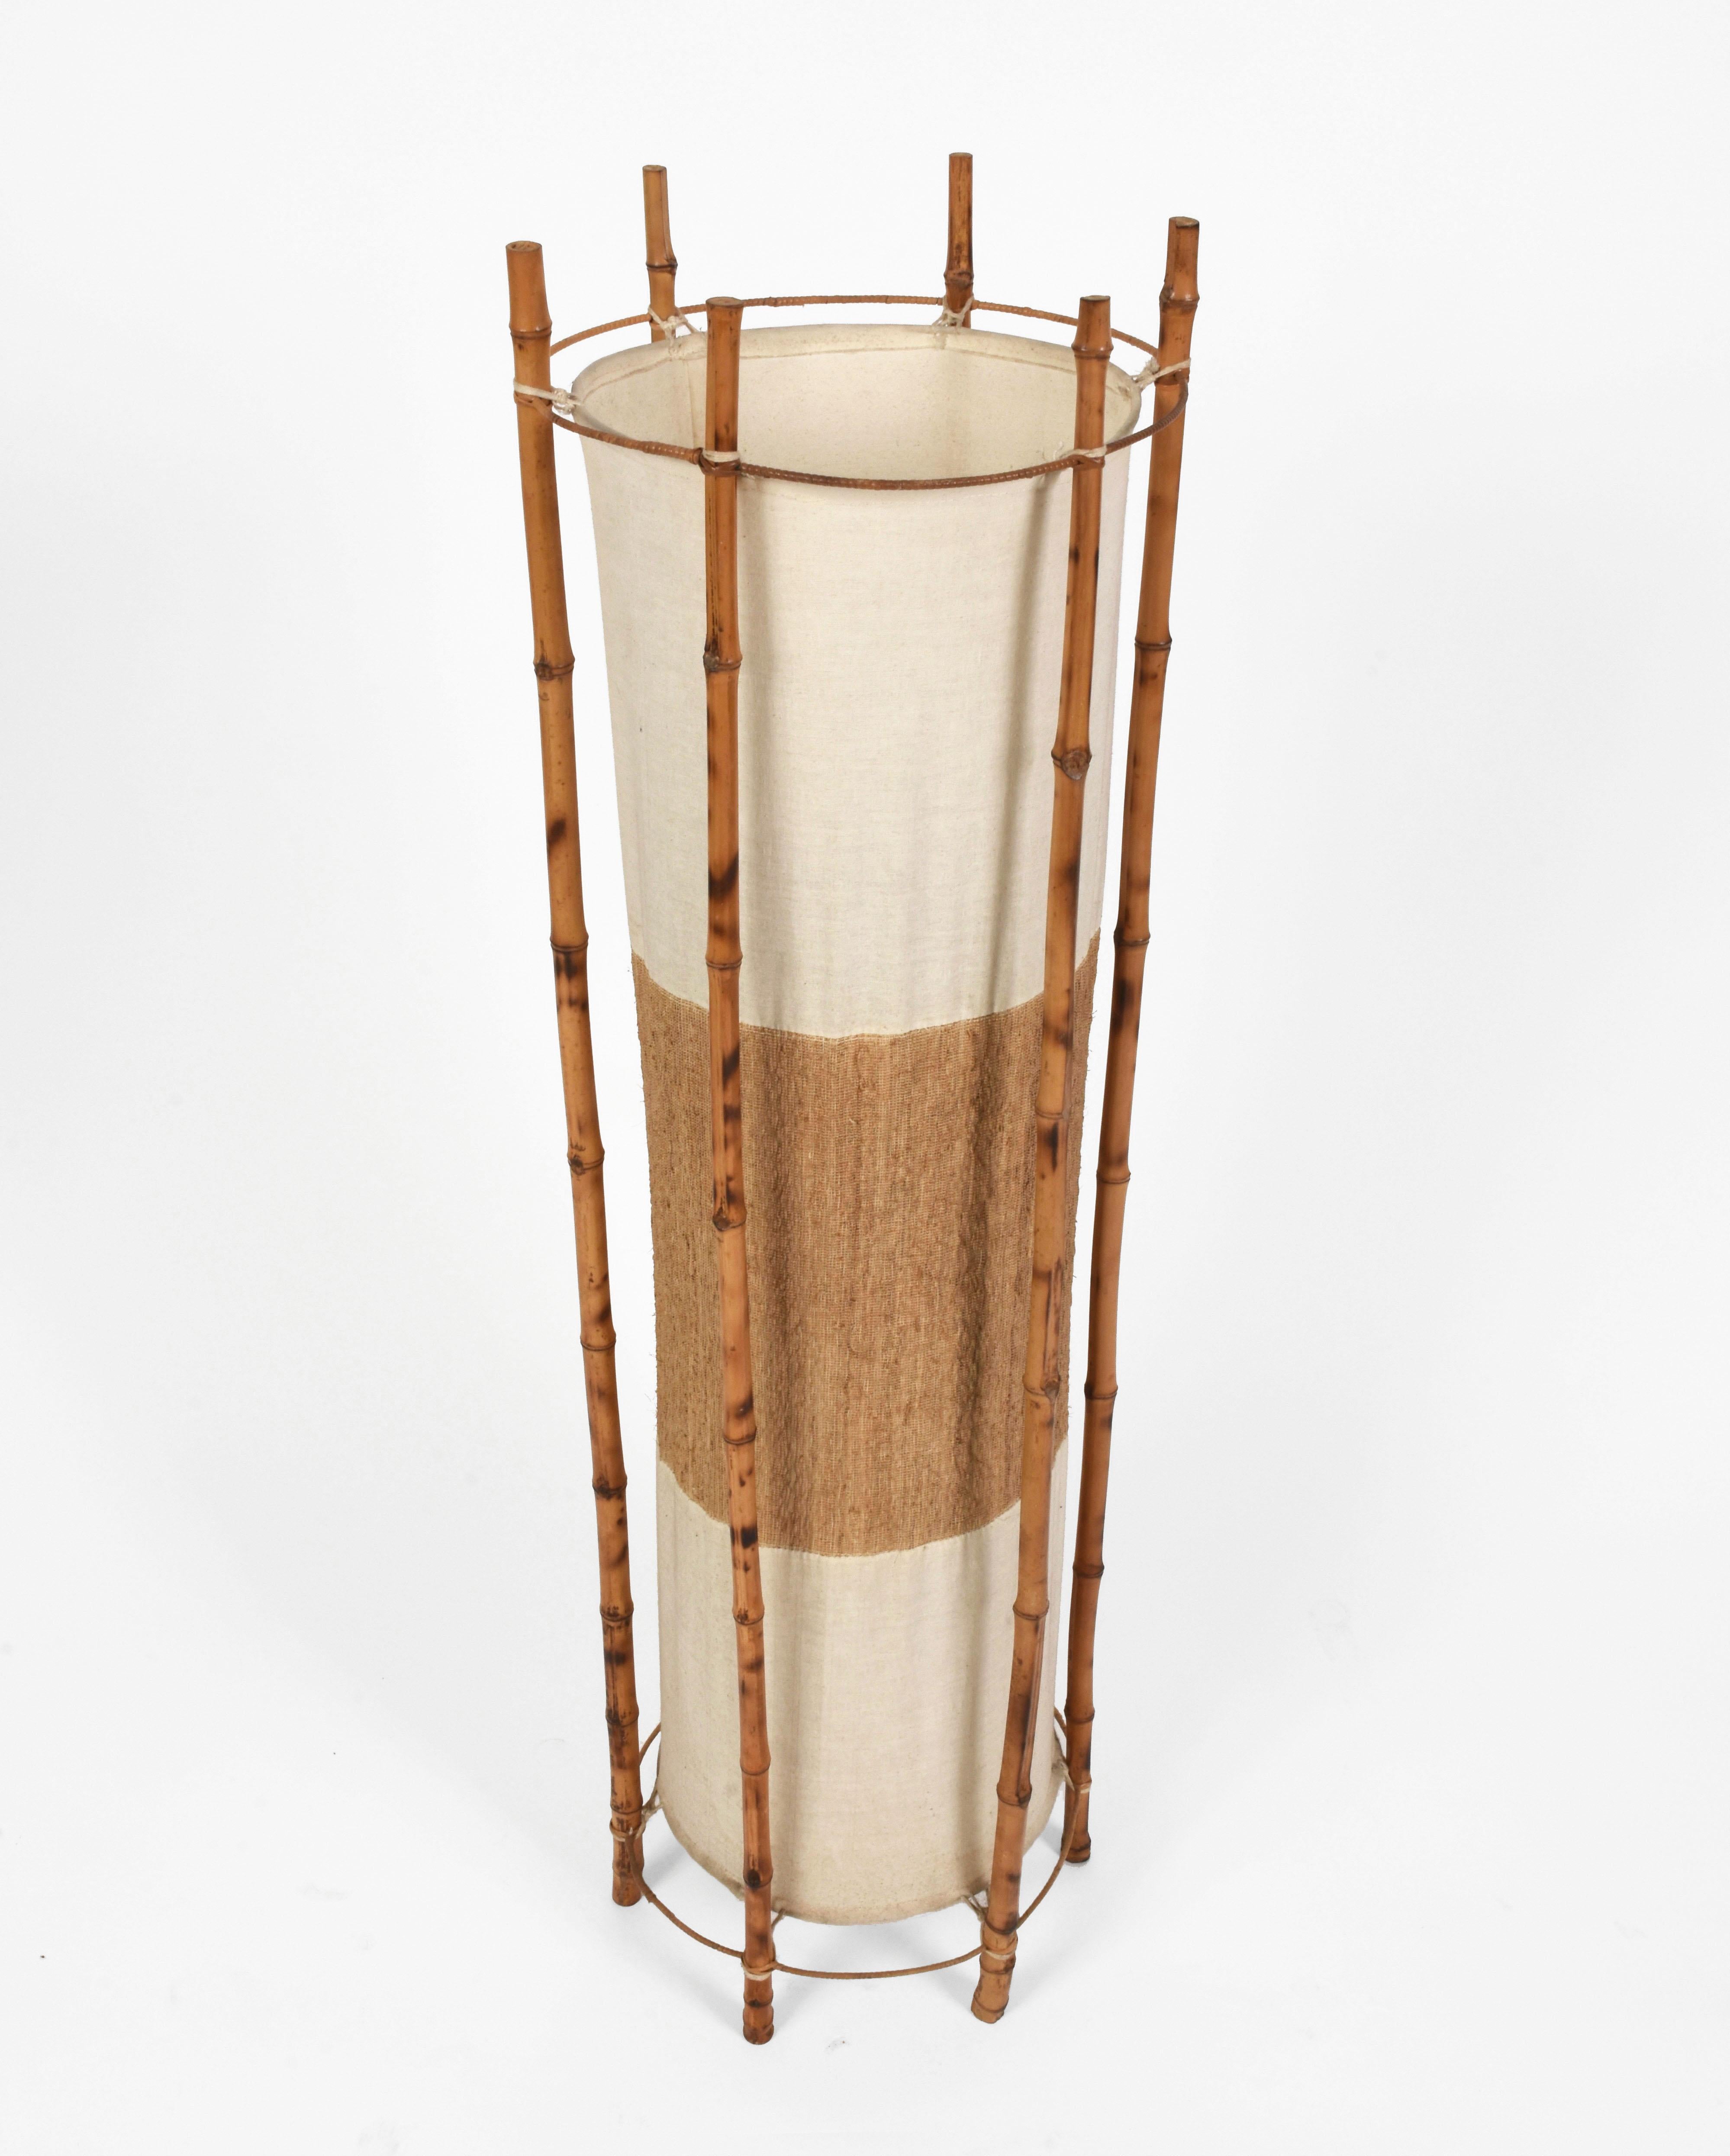 Wonderful bamboo and rattan midcentury floor lamp. This marvelous piece was produced in Italy during 1960s in the style of Louis Sognot.

The external structure is made of bamboo and rattan and holds two cones narrowing in the centre. The effect